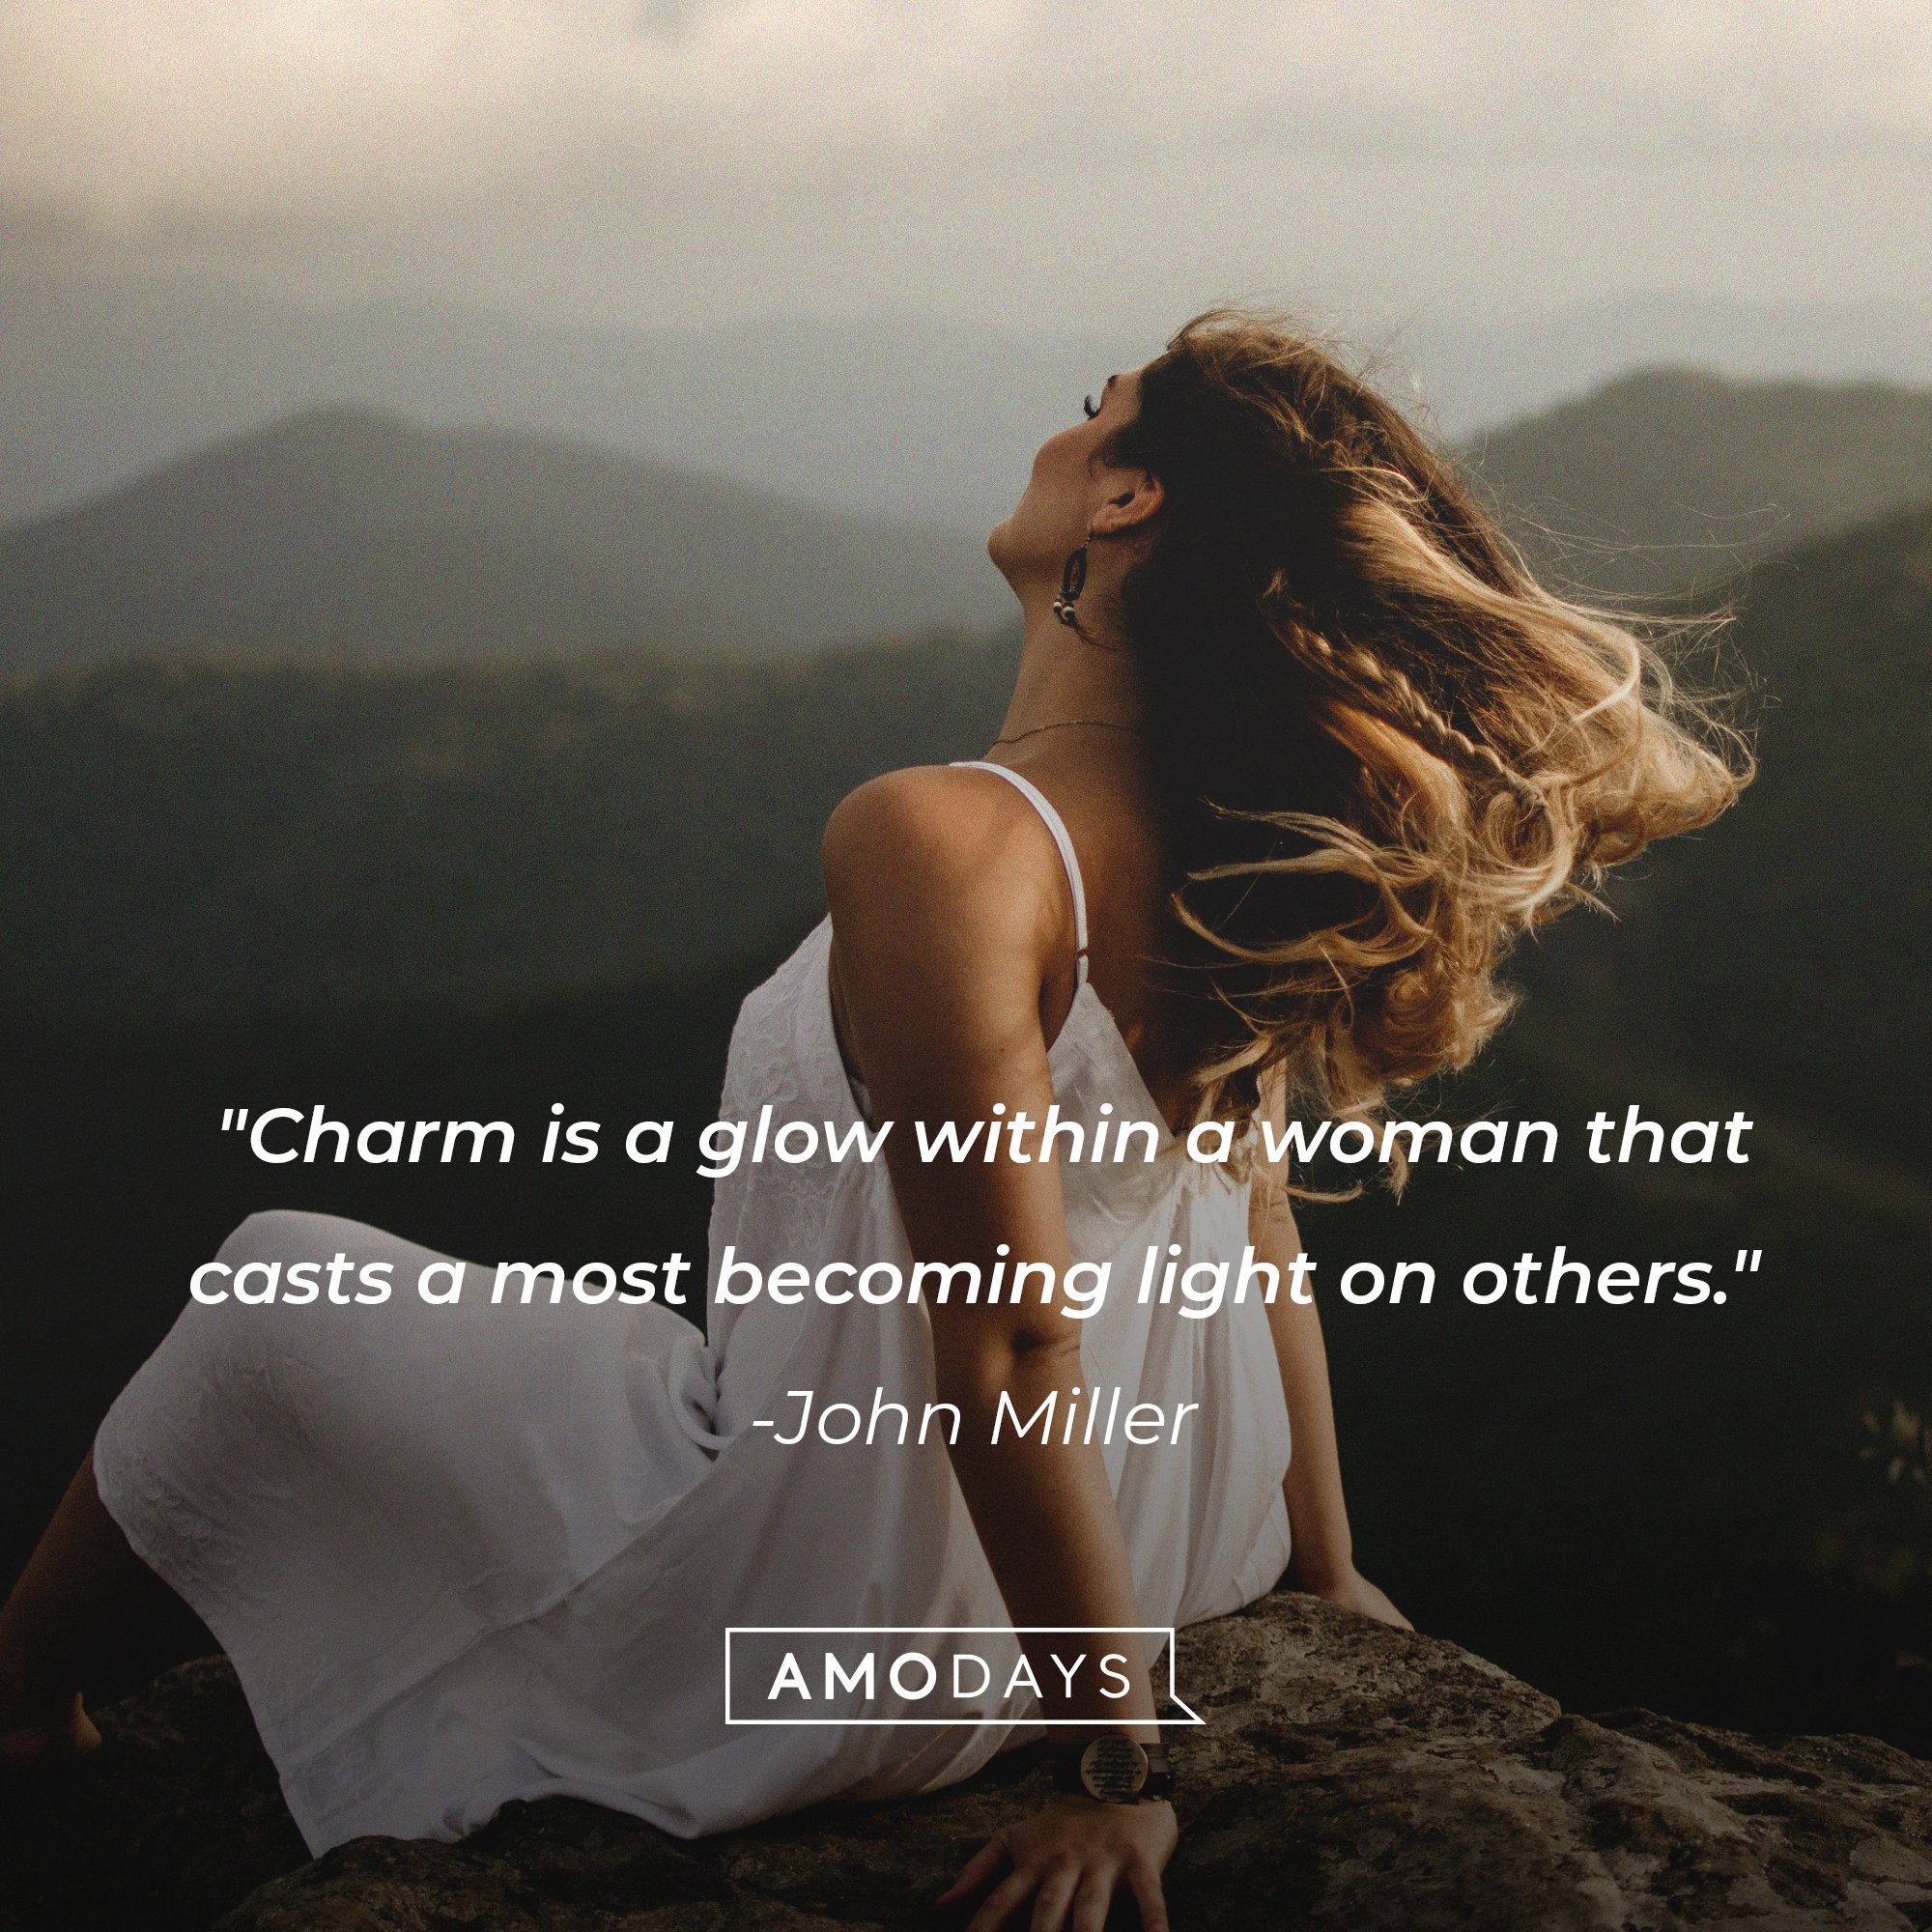 John Miller’s quote: "Charm is a glow within a woman that casts a most becoming light on others." | Image: AmoDays   